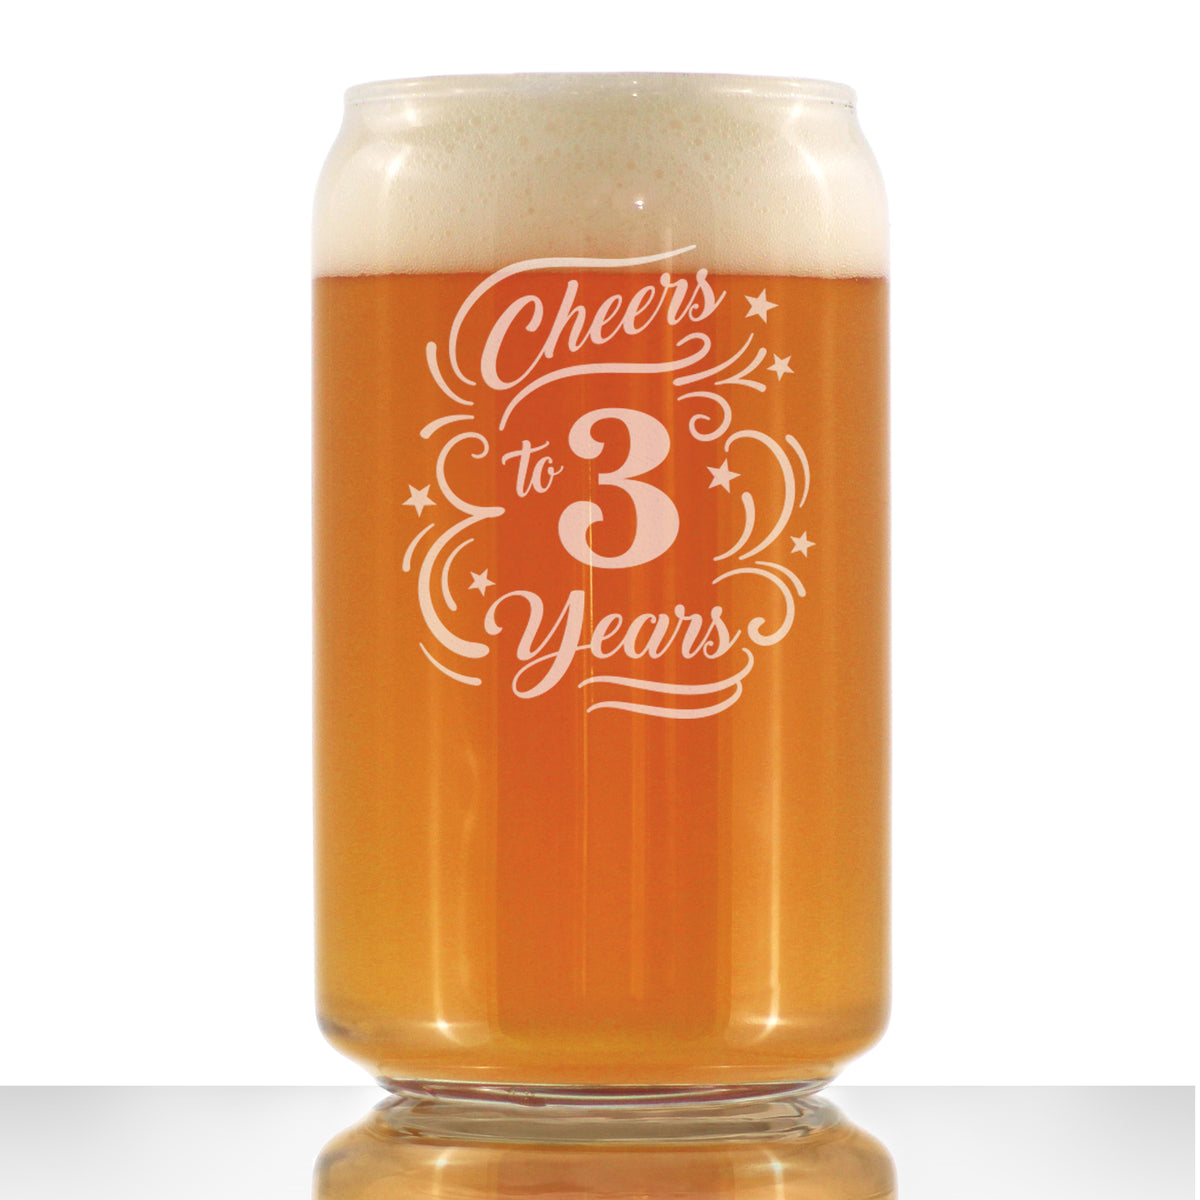 Cheers to 3 Years - Beer Can Pint Glass Gifts for Women &amp; Men - 3rd Anniversary Party Decor - 16 Oz Glasses